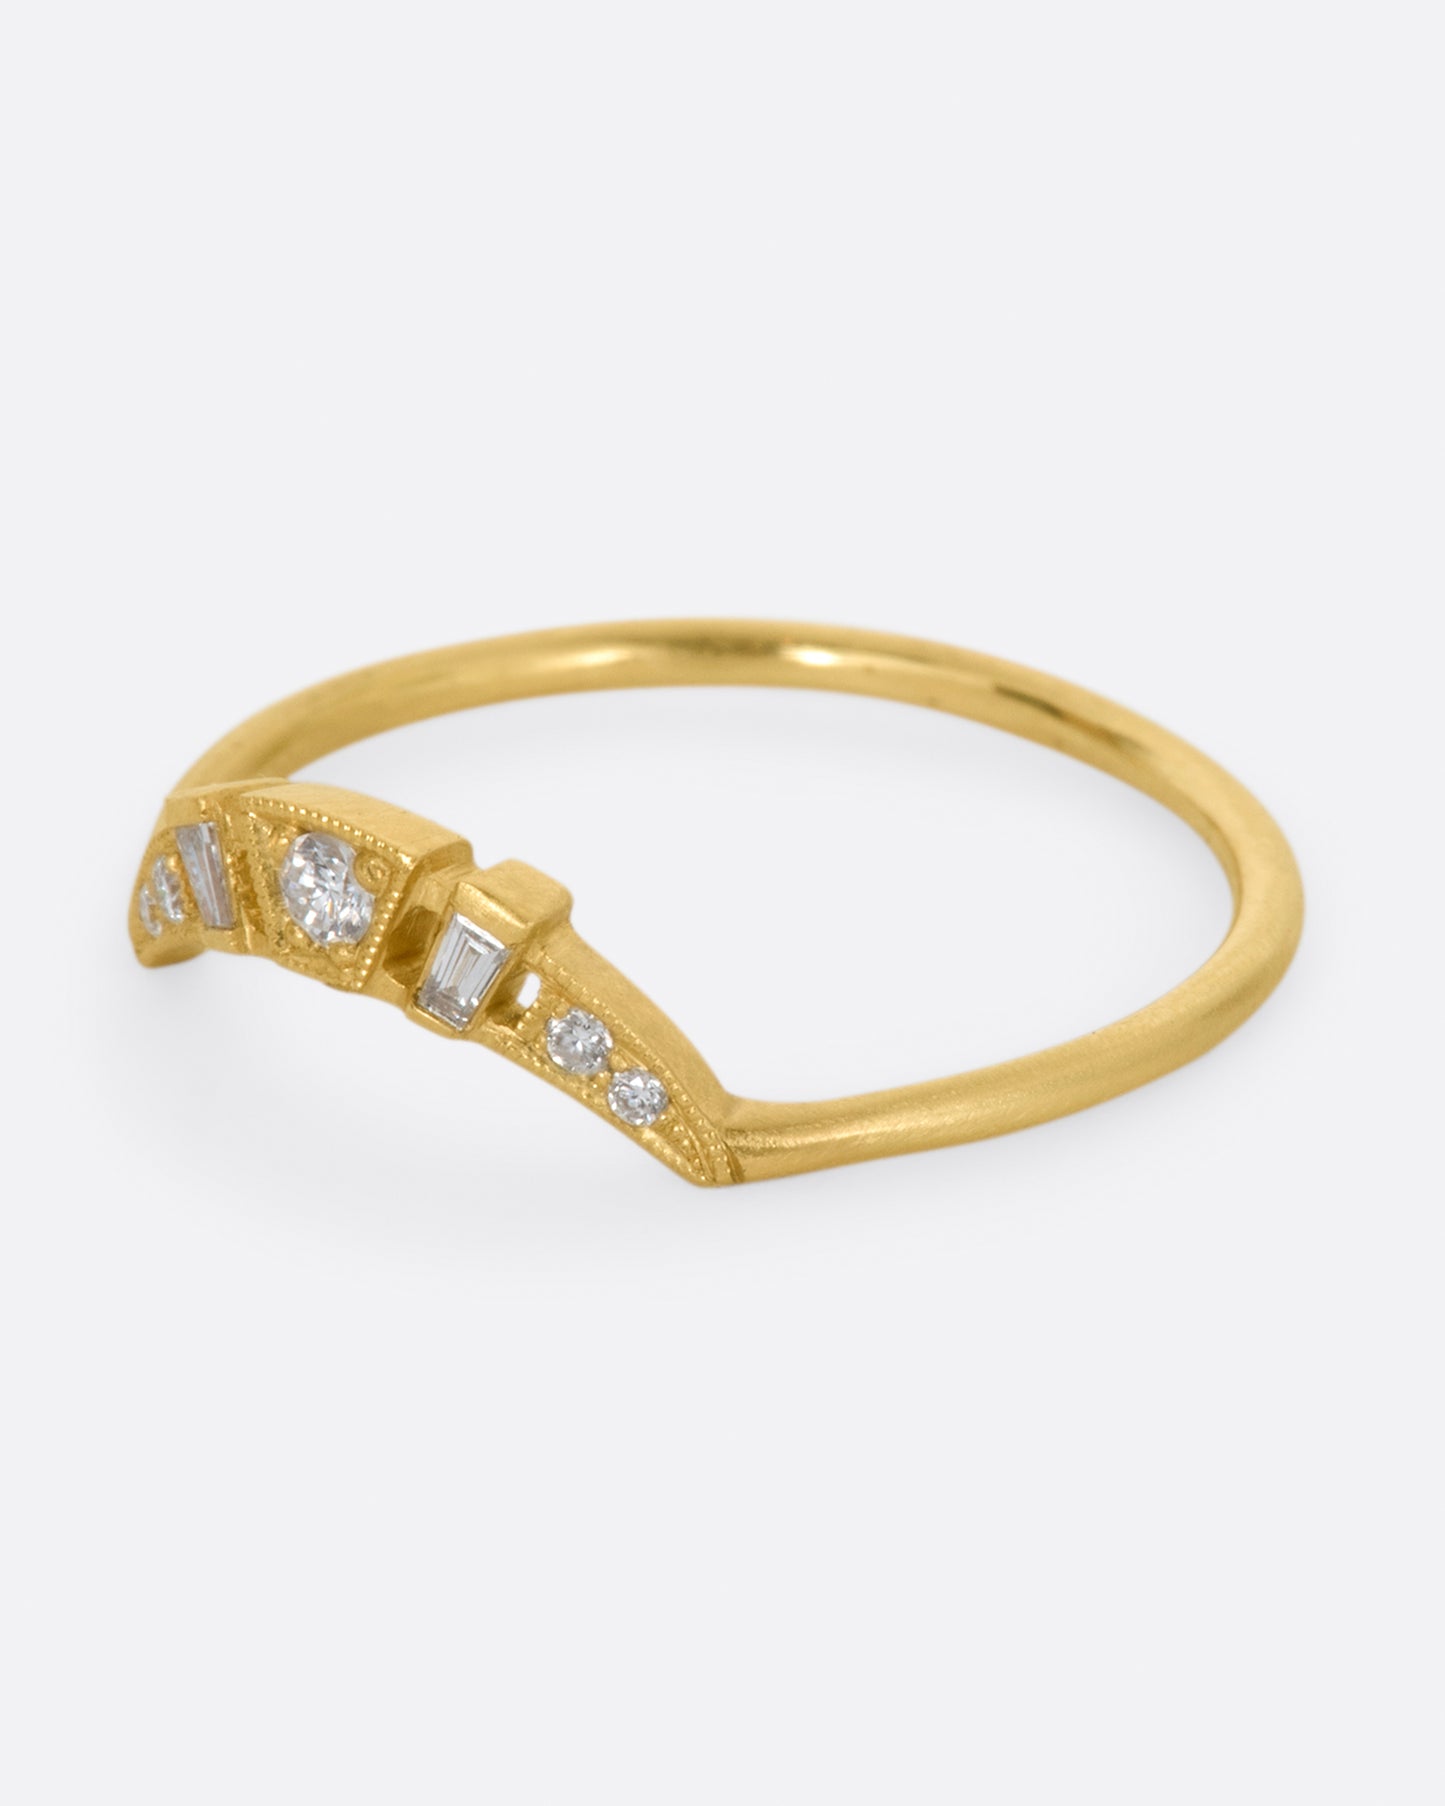 A yellow gold ring with a curved face that makes it good for stacking, dotted with round and baguette diamonds, and milgrain details - shown from the side.